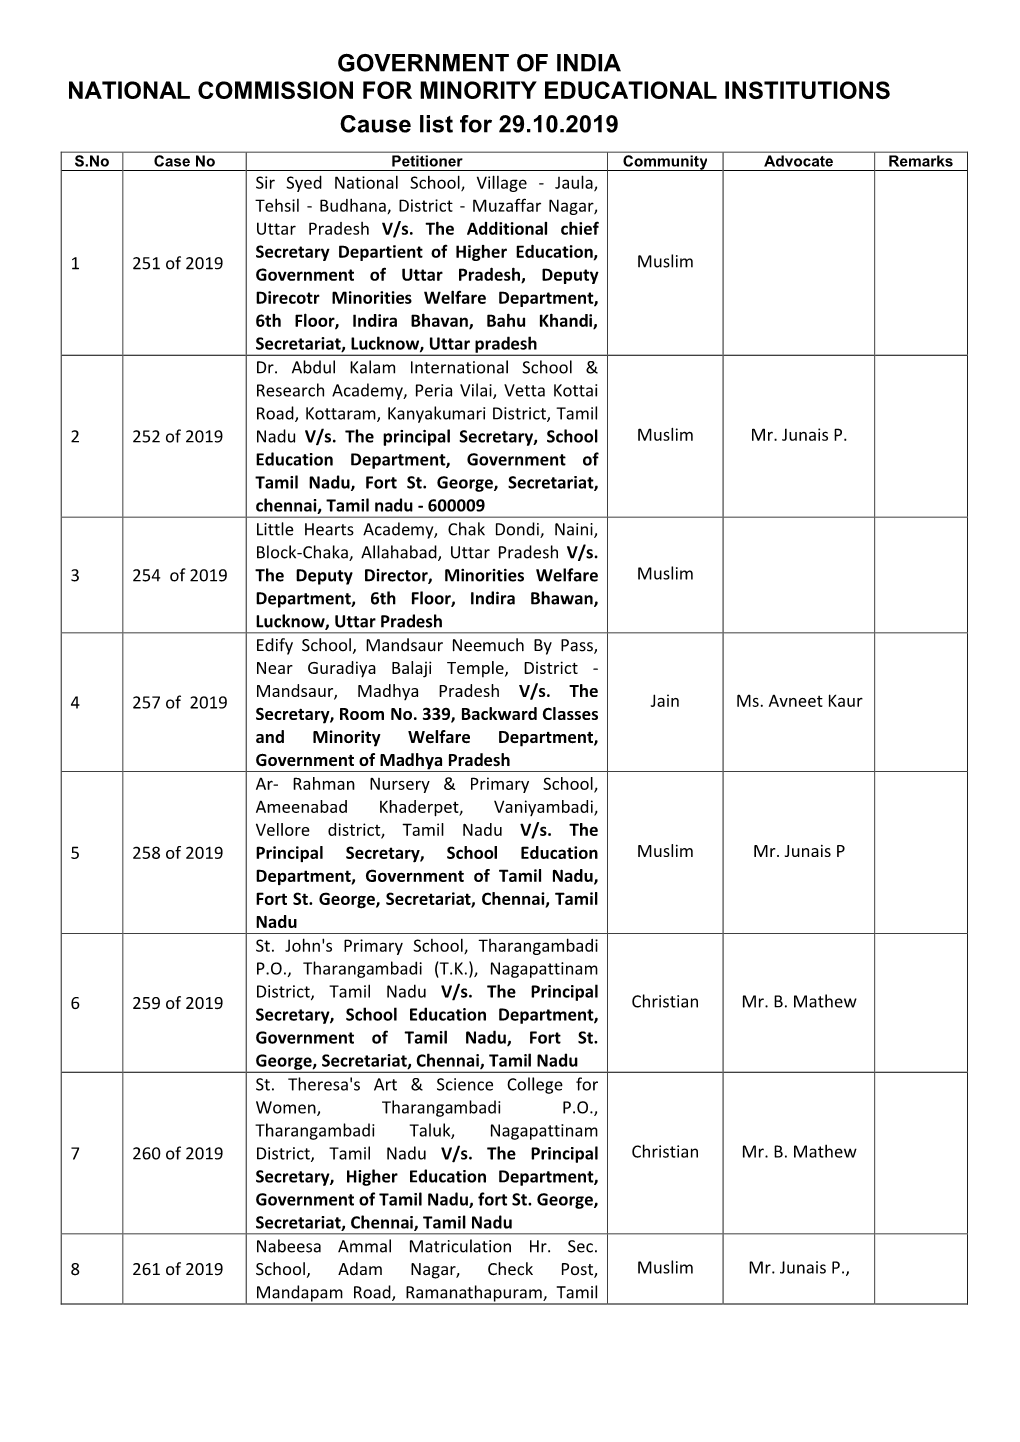 GOVERNMENT of INDIA NATIONAL COMMISSION for MINORITY EDUCATIONAL INSTITUTIONS Cause List for 29.10.2019